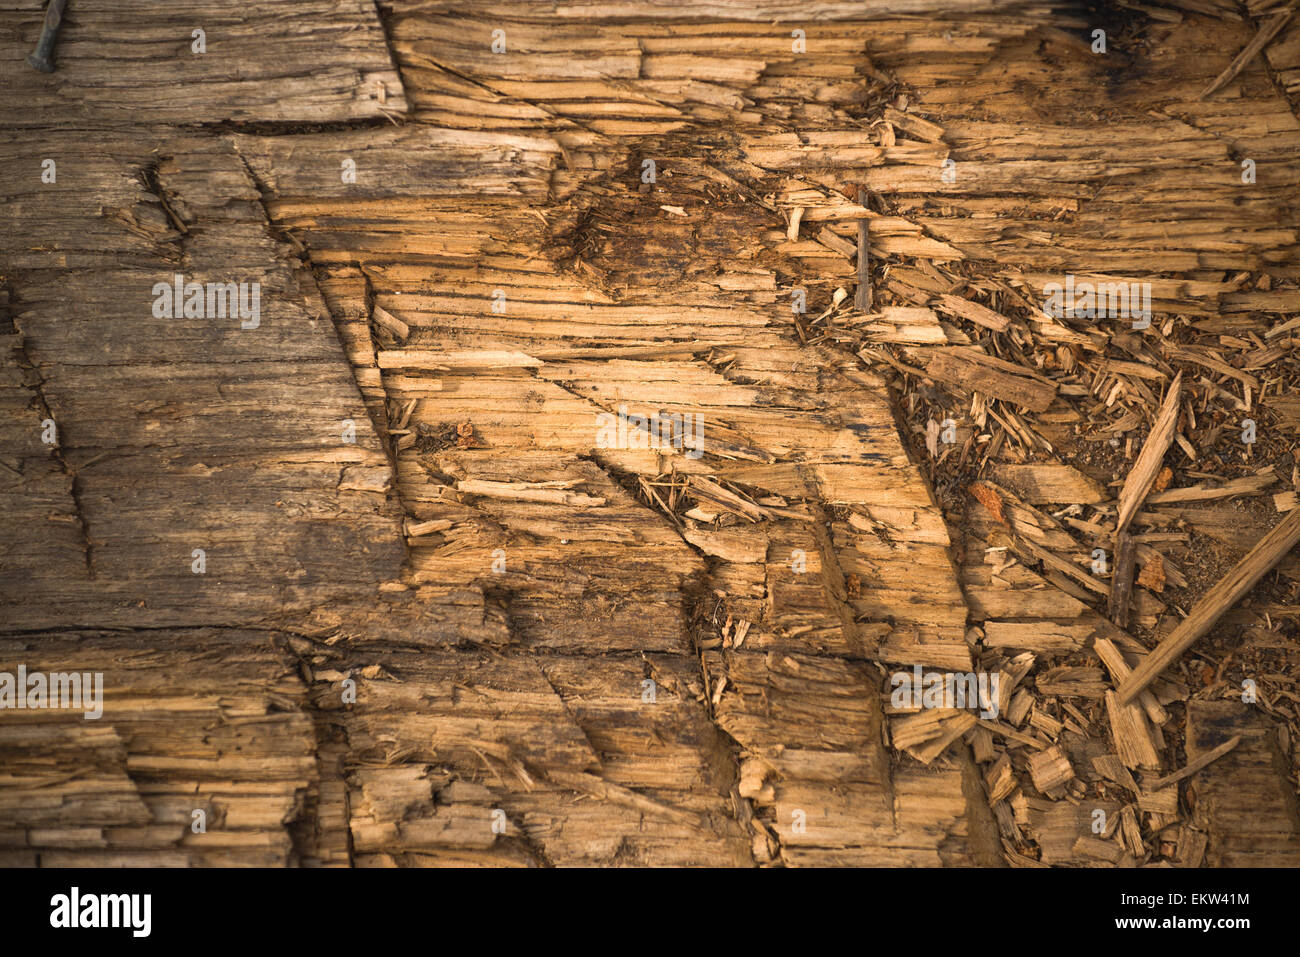 Chopped Wooden Plank Texture as Natural Background Stock Photo